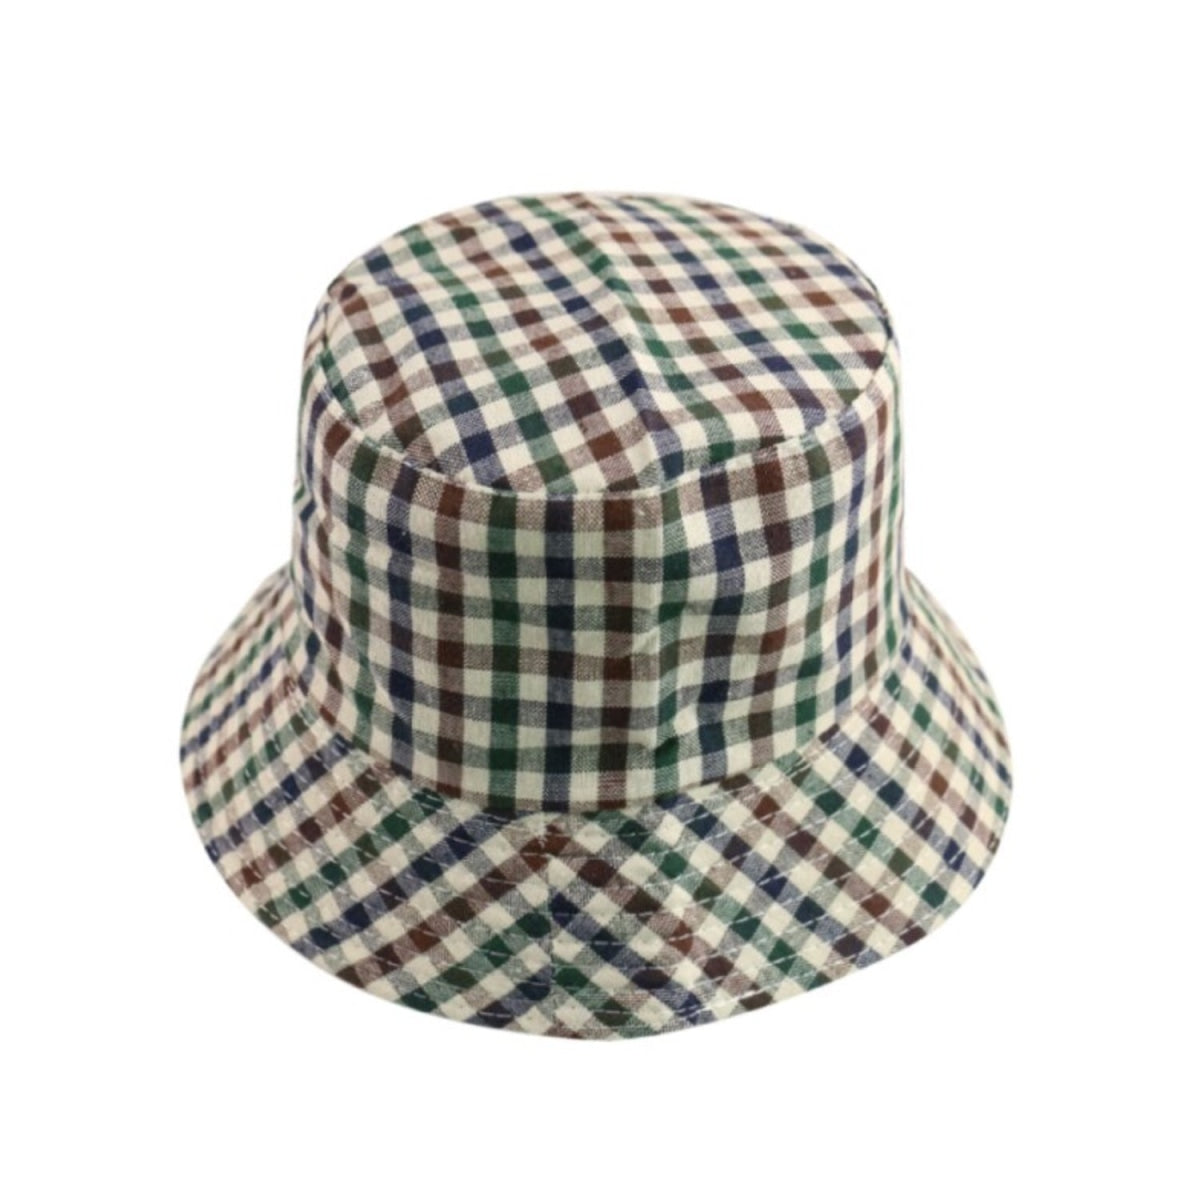 Reversible Black White Cow Pattern Colourful Checkerboard Bucket Hats Fisherman Caps Checked 2